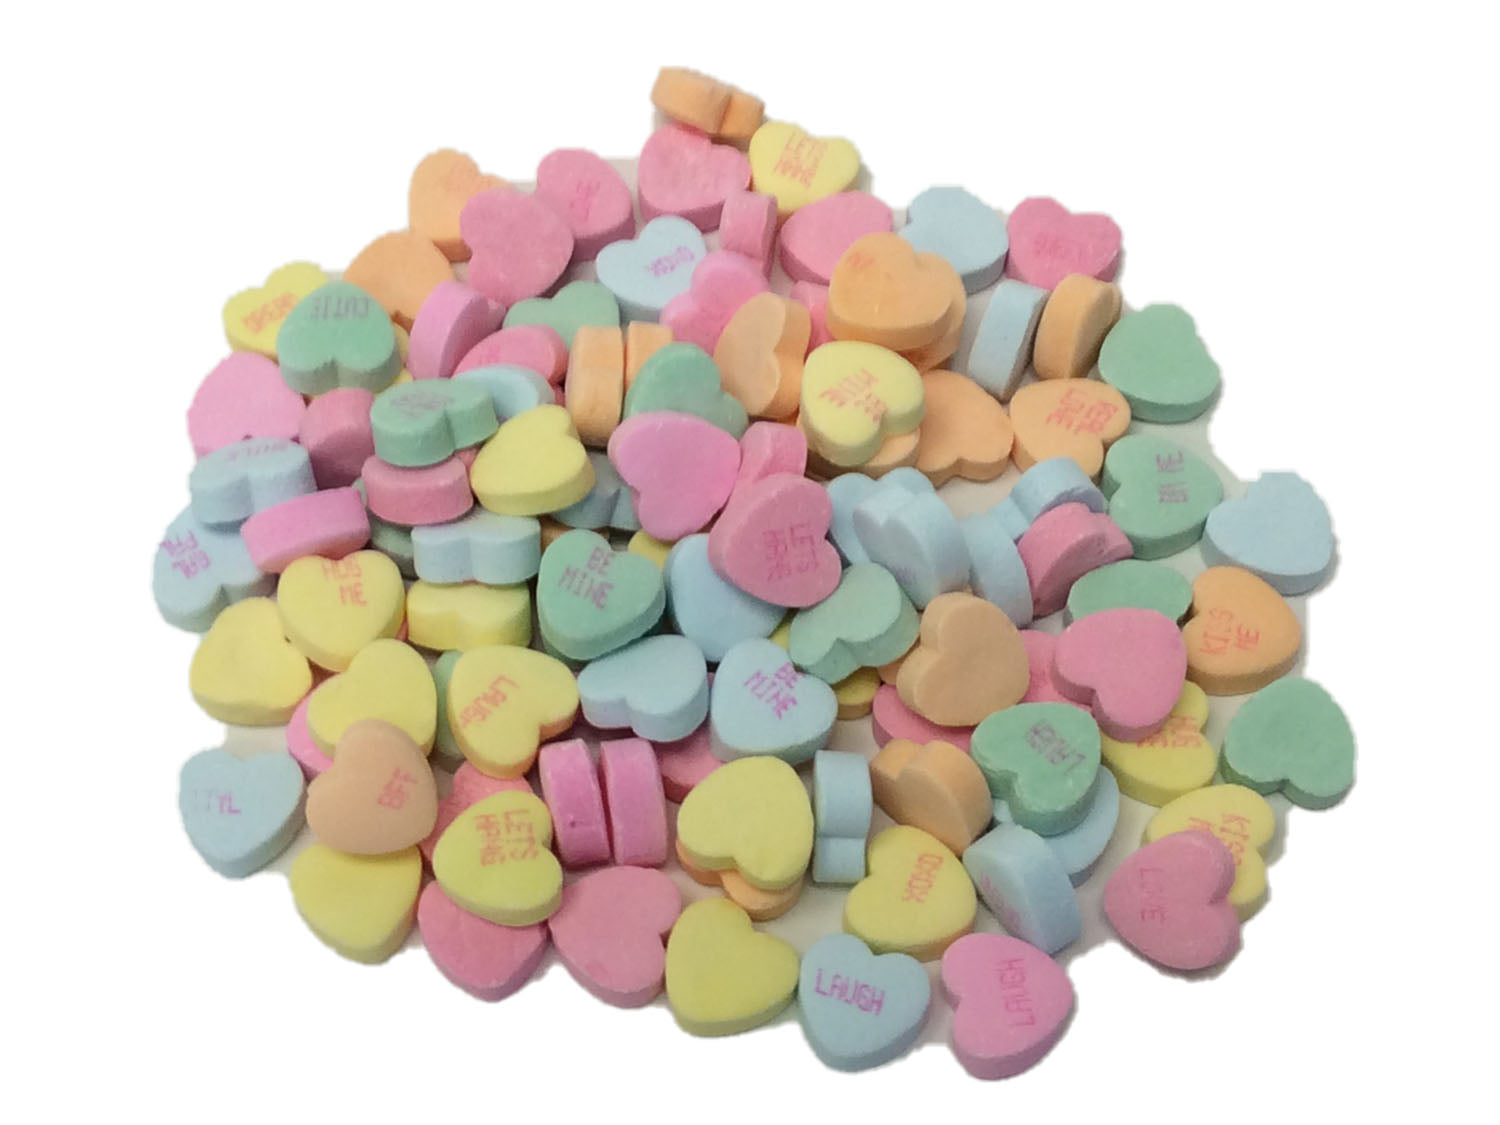 Conversation Hearts (all sizes) –